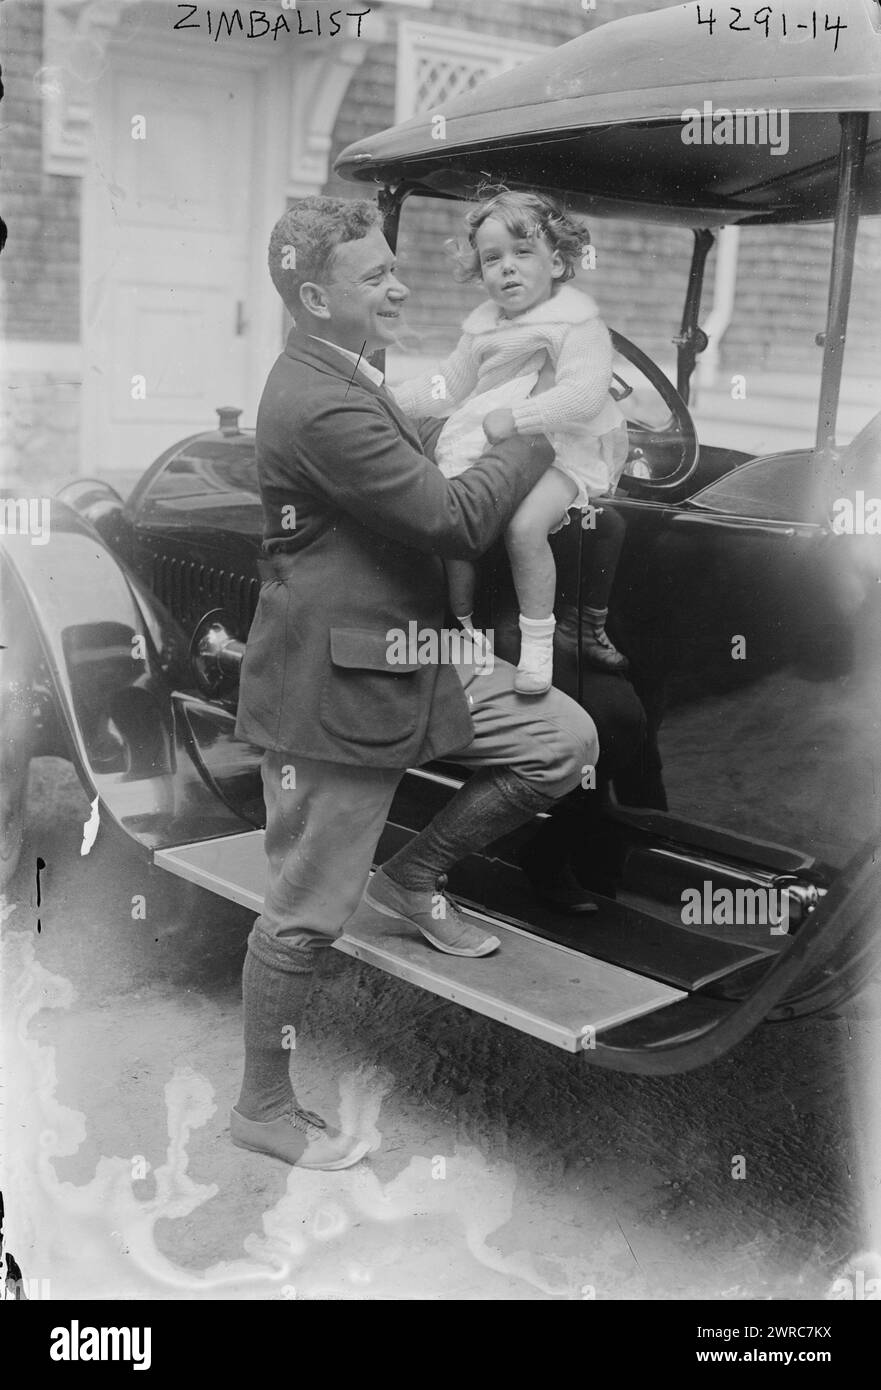 Zimbalist, Photograph shows Efrem Zimbalist Sr. (1889/90-1985), an internationally known concert violinist, composer, teacher, conductor, and director of the Curtis Institute of Music with his daughter Maria, vacationing possibly on Fishers Island, New York in August of 1917., 1917 August, Glass negatives, 1 negative: glass Stock Photo